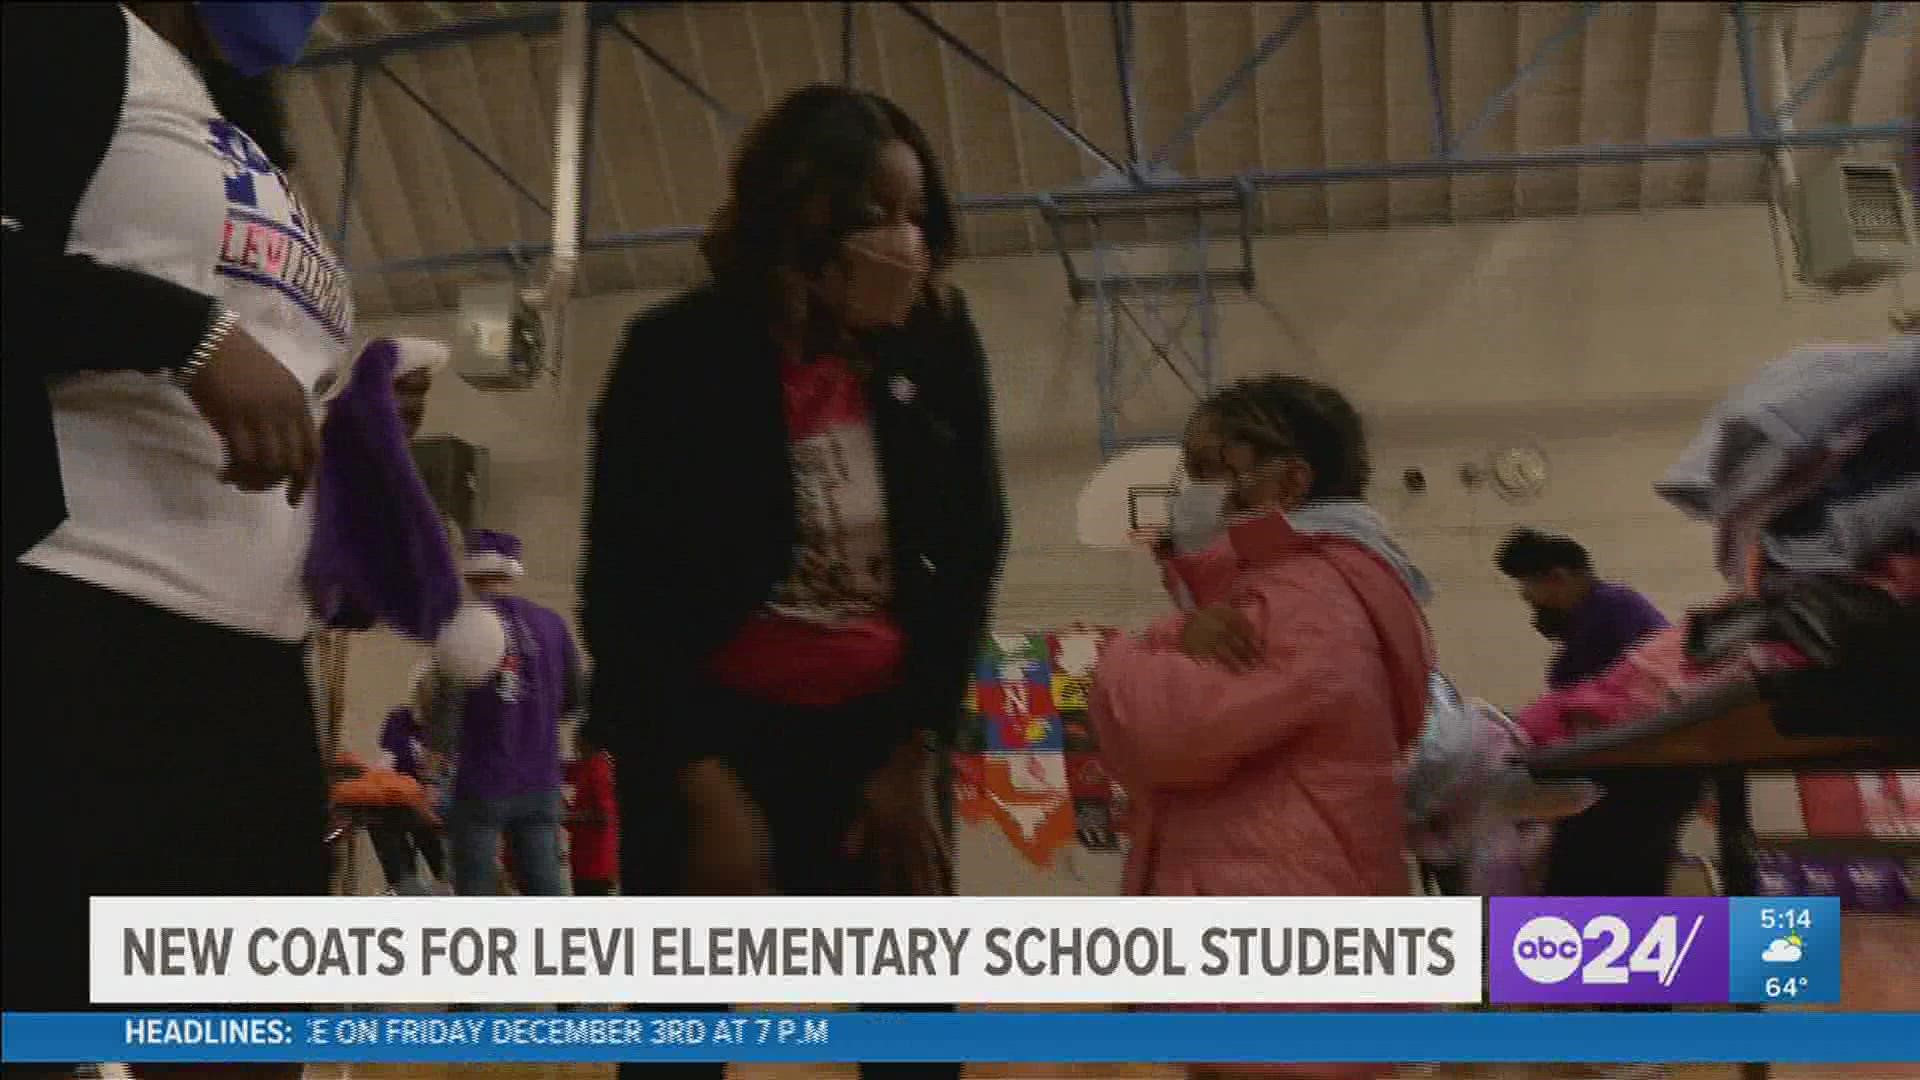 FedEx distributed 500 brand new coats to students at Levi Elementary School Wednesday. They also passed out food items donated from Blessings in a Backpack.